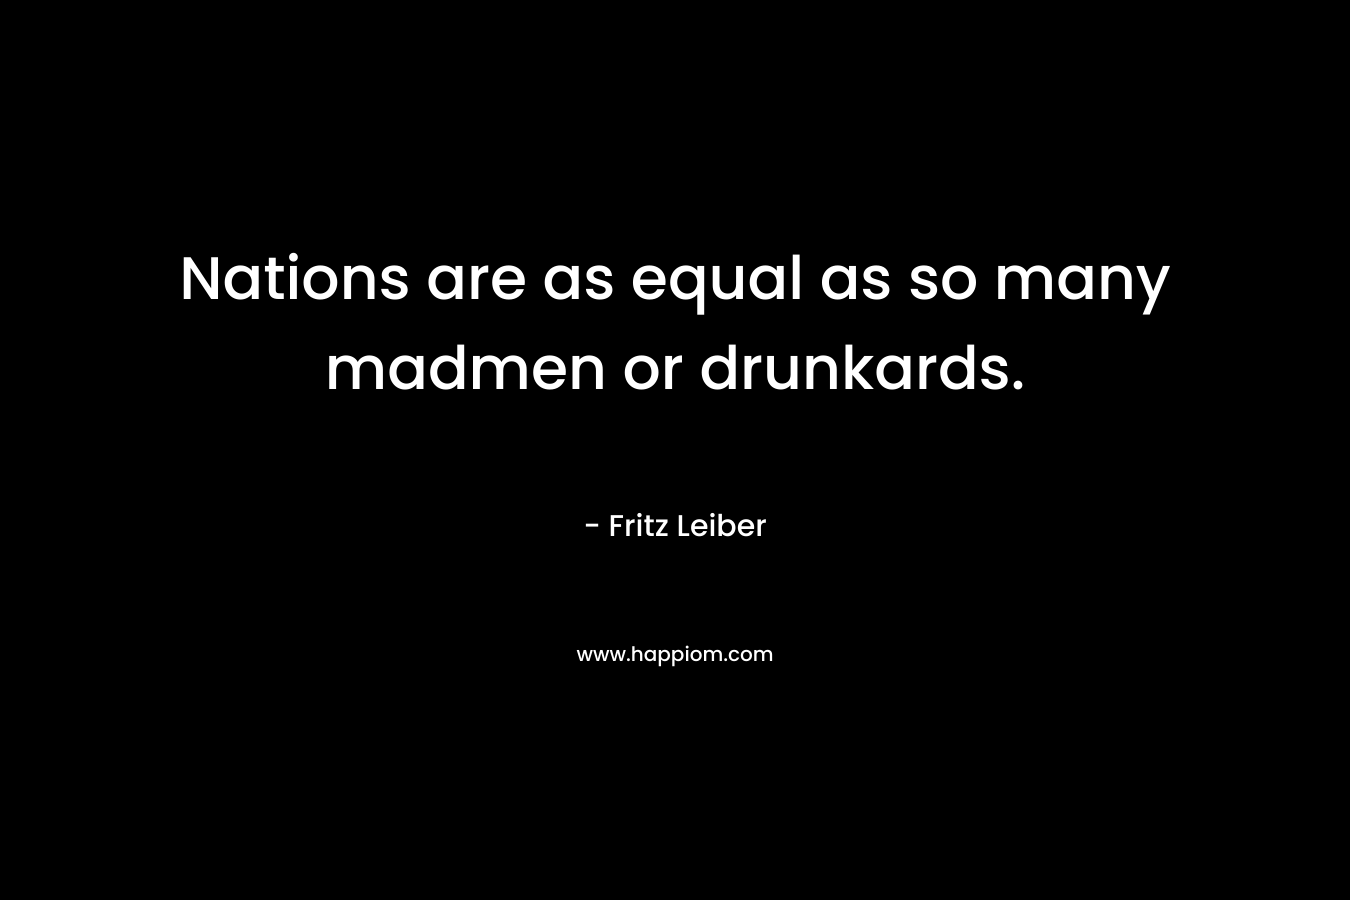 Nations are as equal as so many madmen or drunkards.